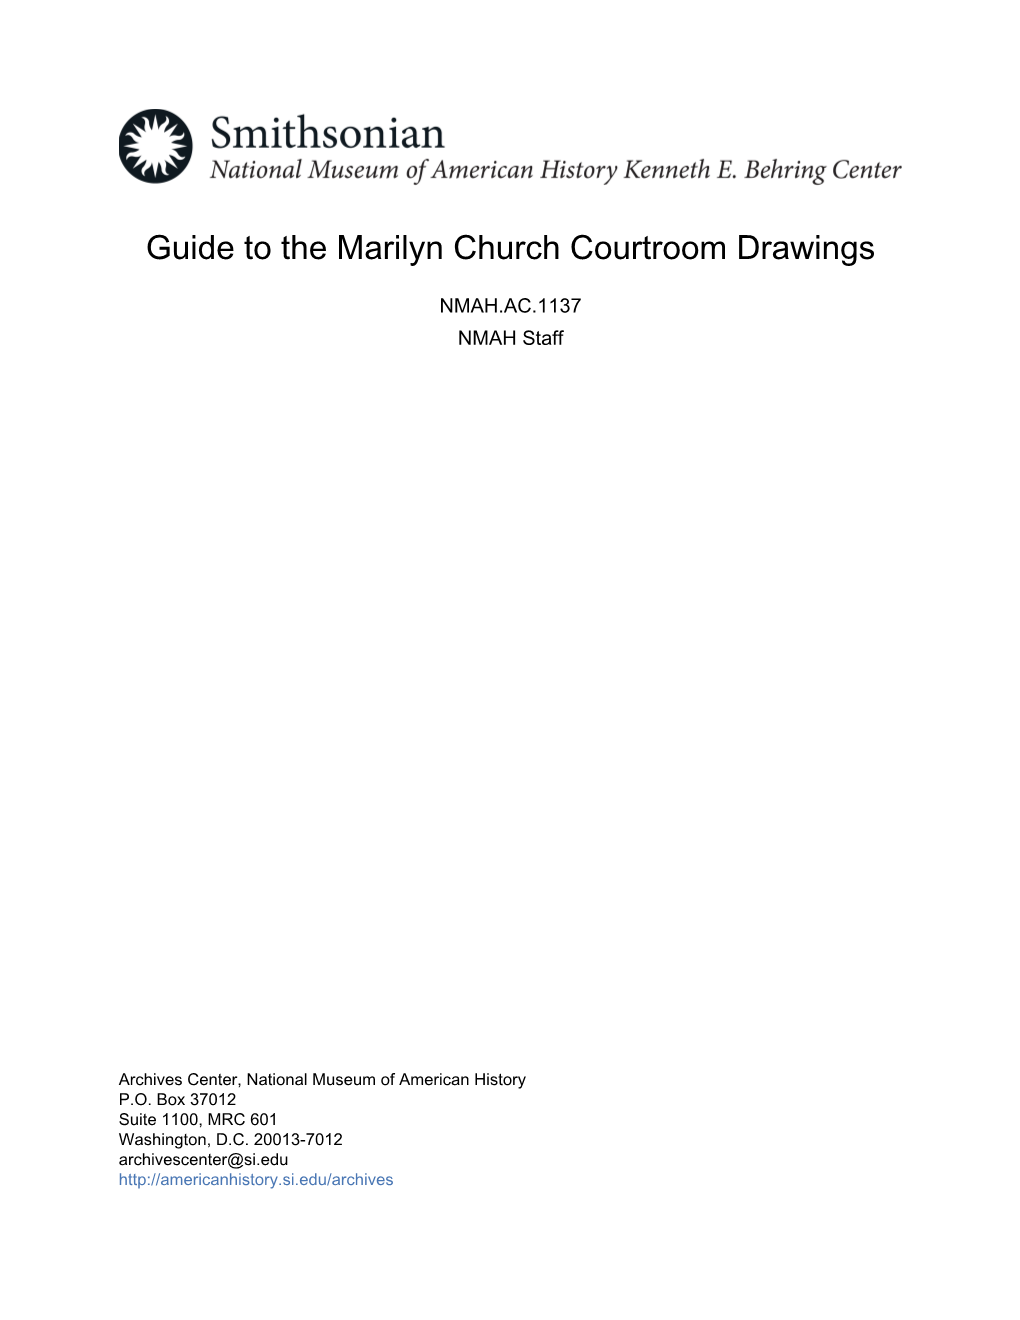 Guide to the Marilyn Church Courtroom Drawings